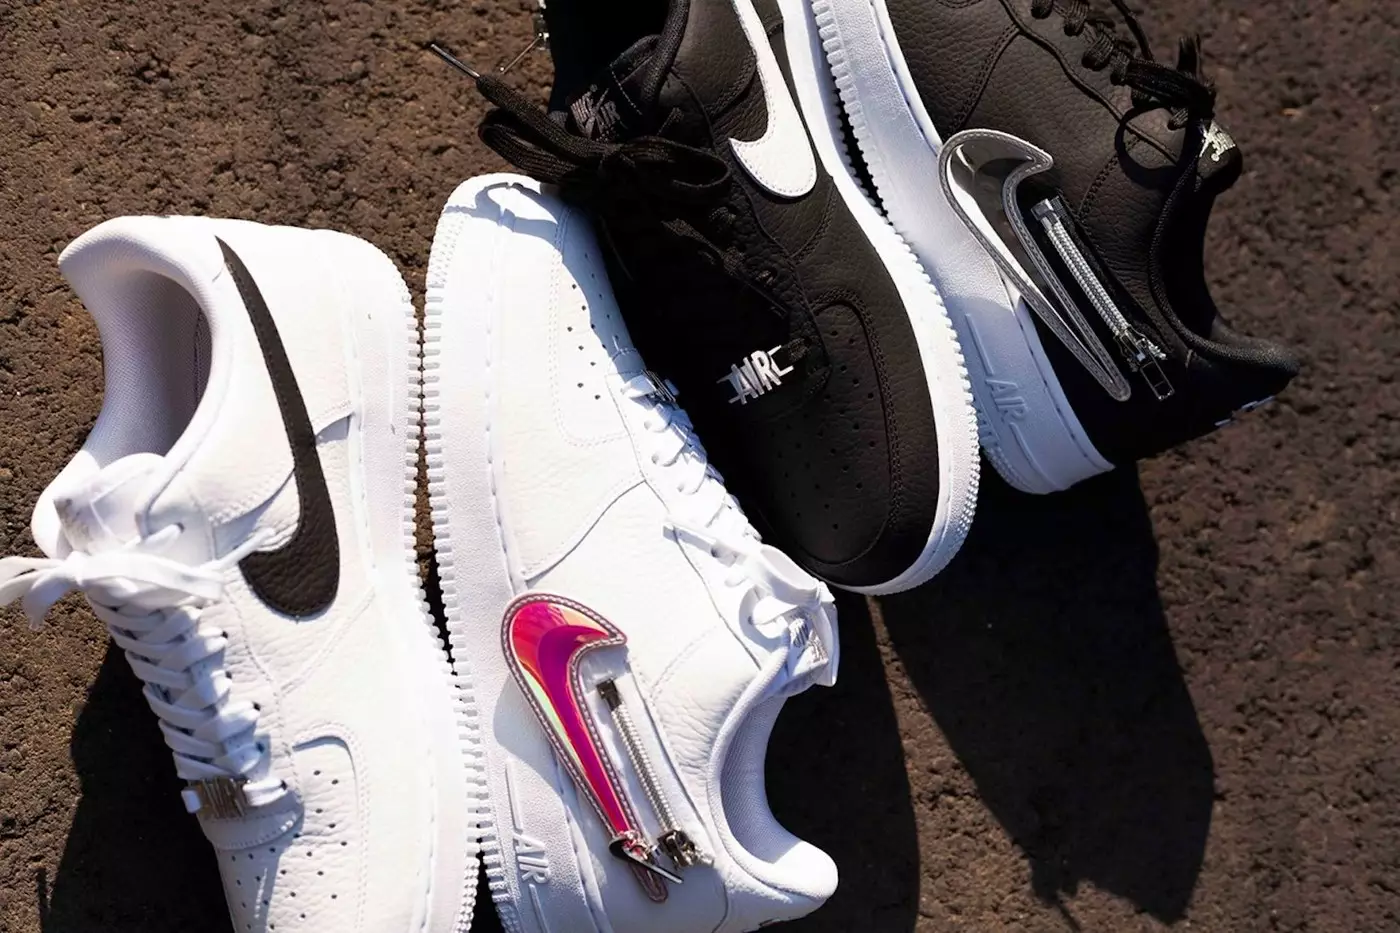 How much would you pay for a switchable swoosh?